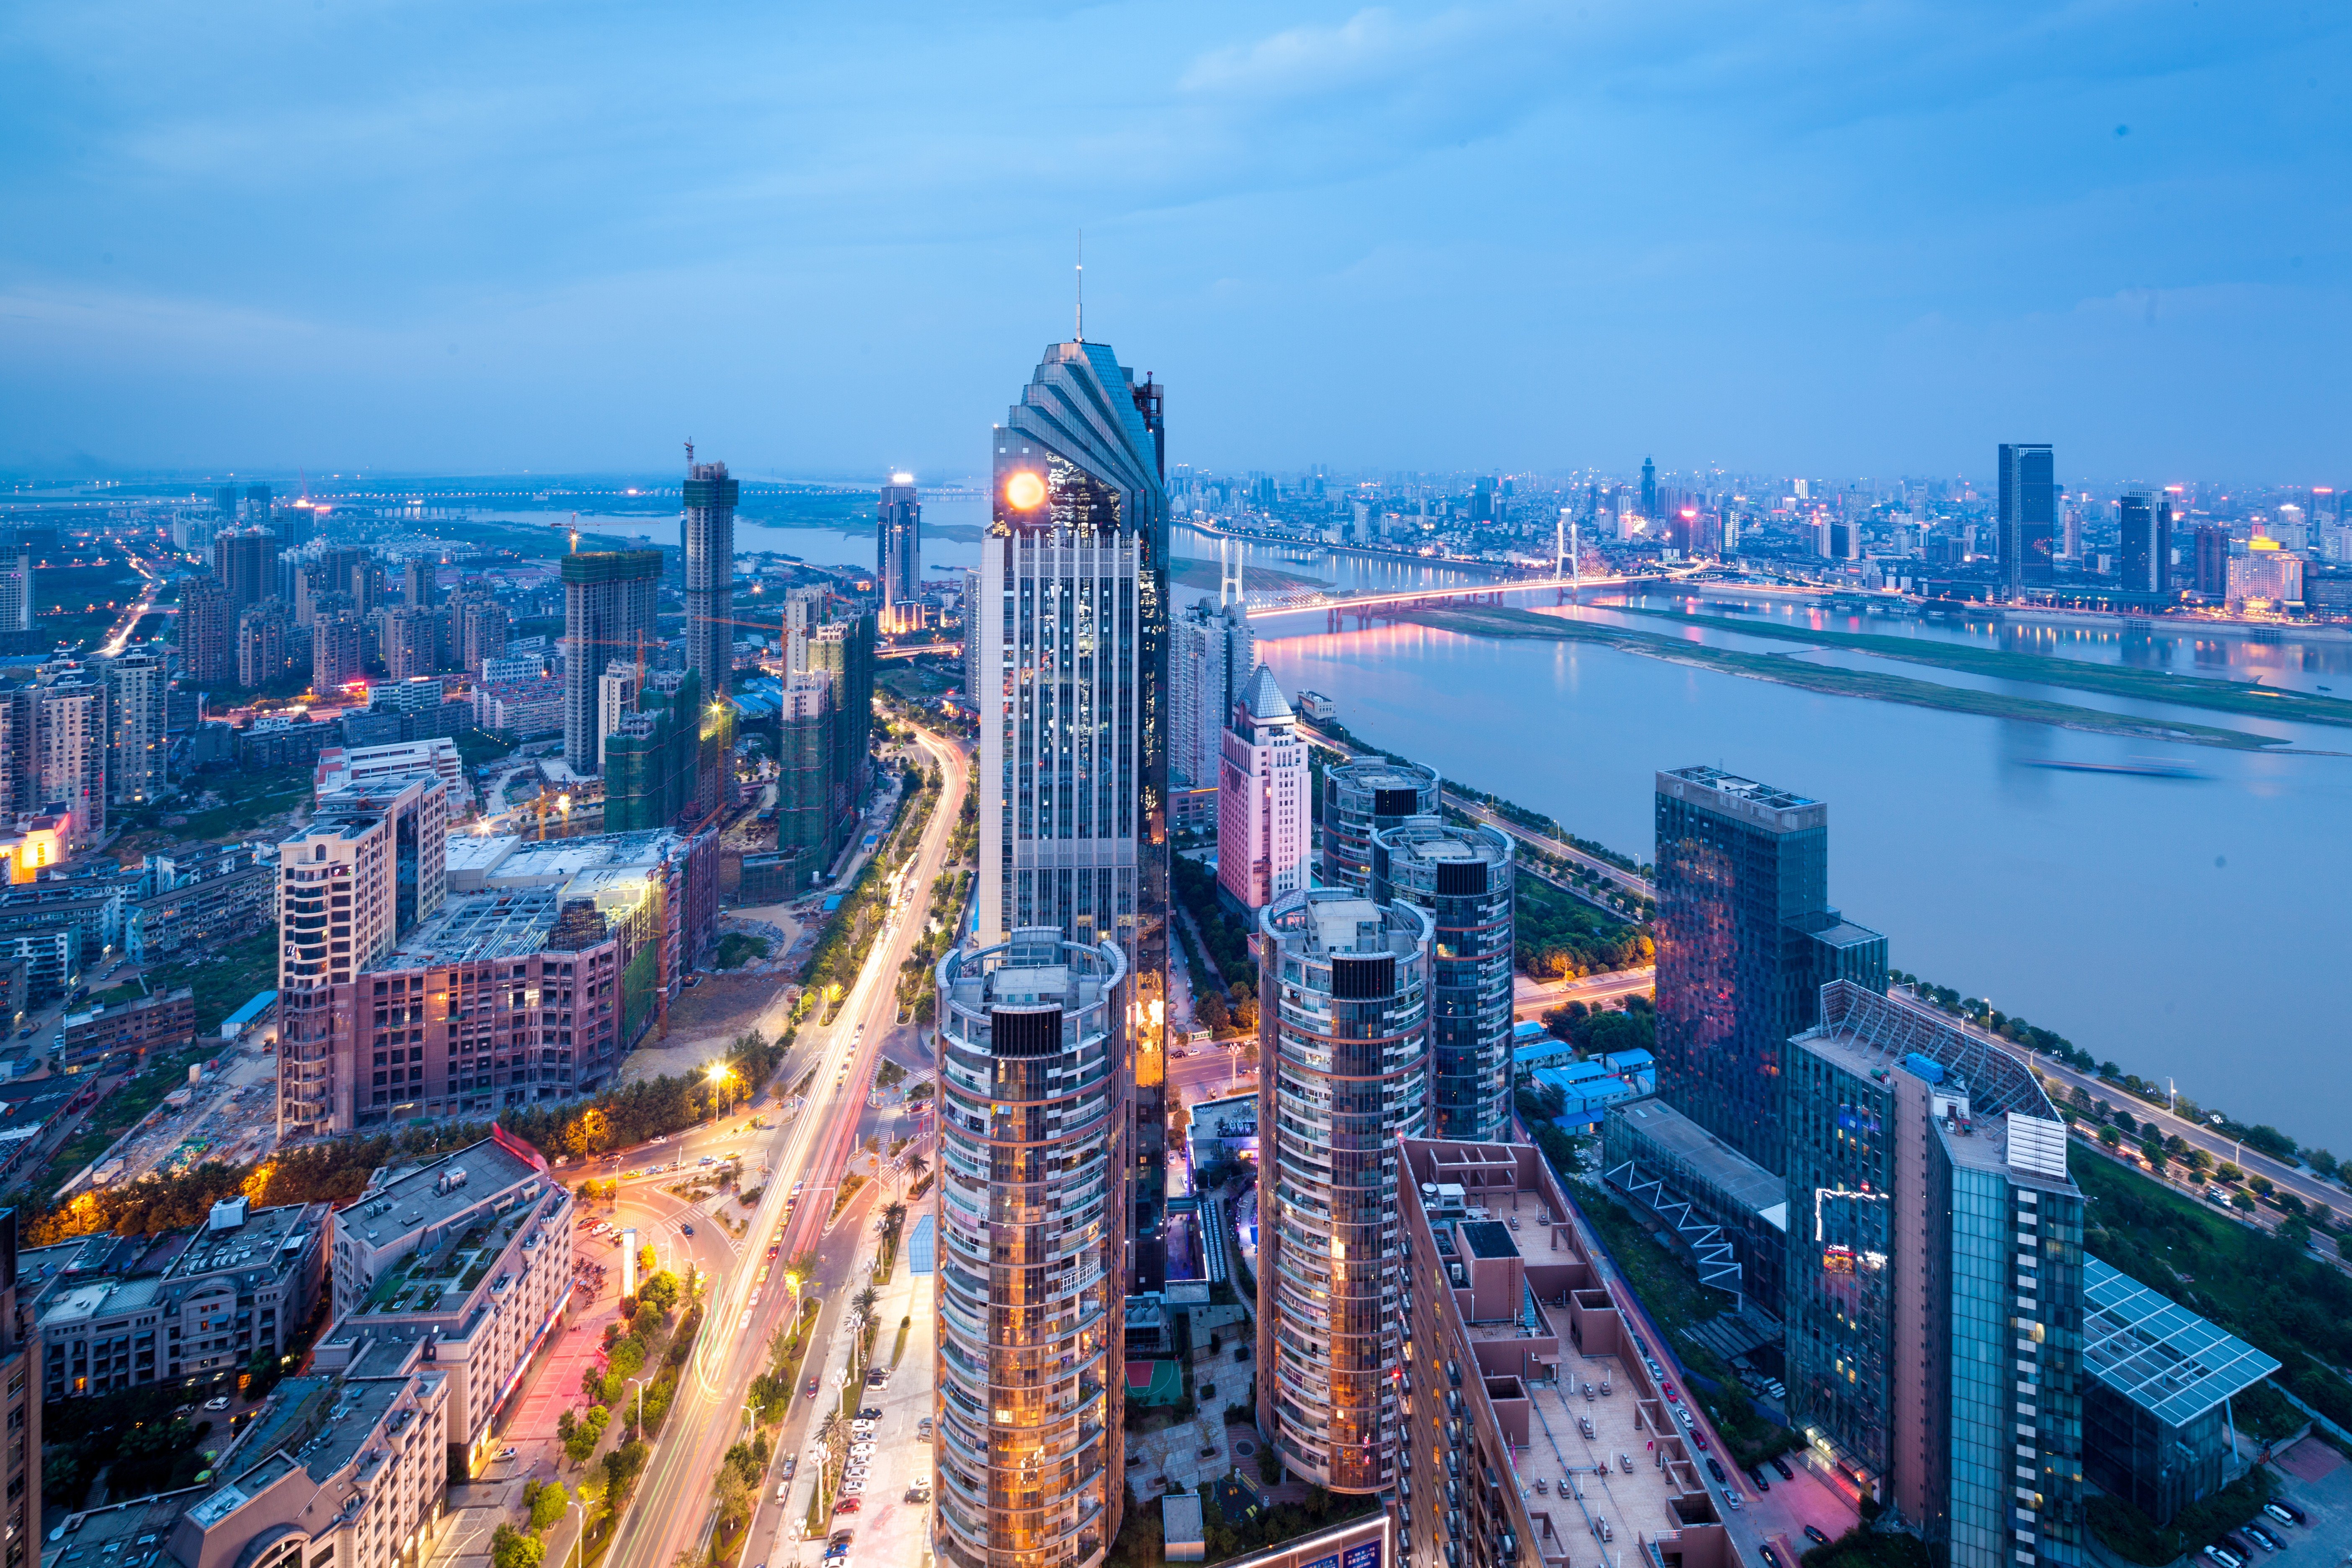 The Chinese government expects the GDP of the Greater Bay Area, which includes 11 Pearl River Delta cities such as Shenzhen (pictured), to reach US$4.62 trillion by 2030. Photo: Shutterstock